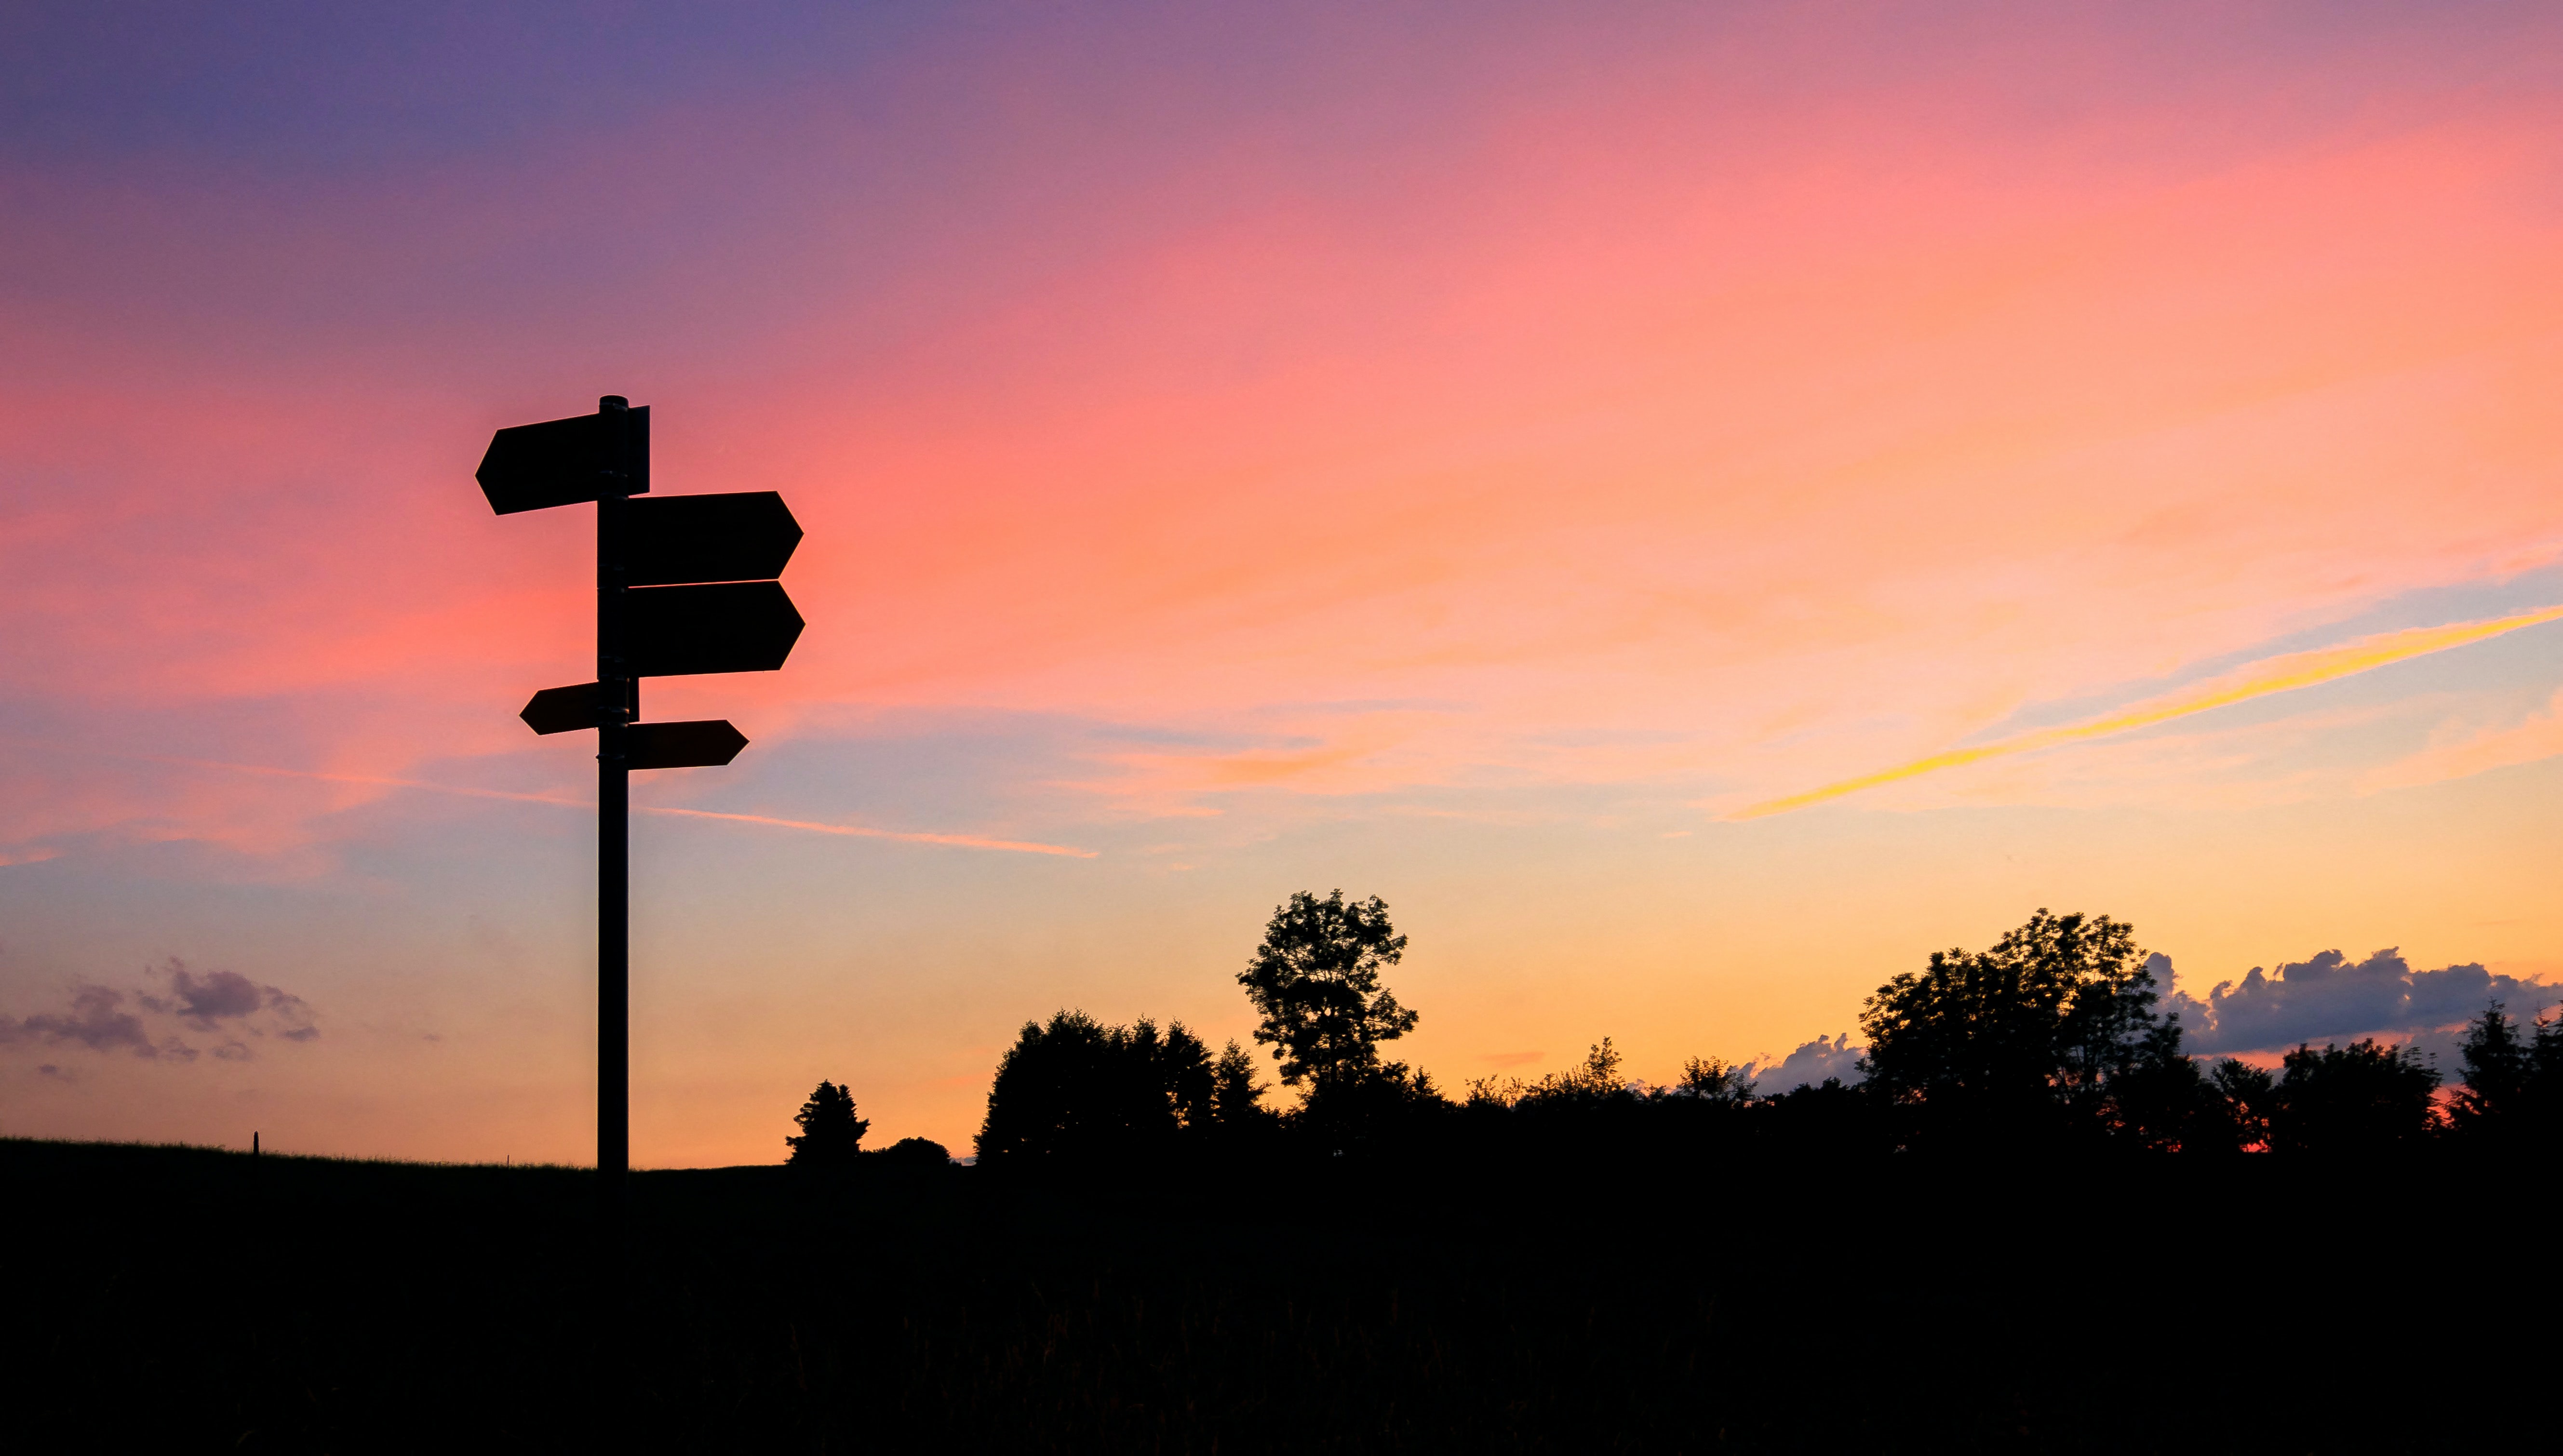 a silhouette of a signpost against a pink sky